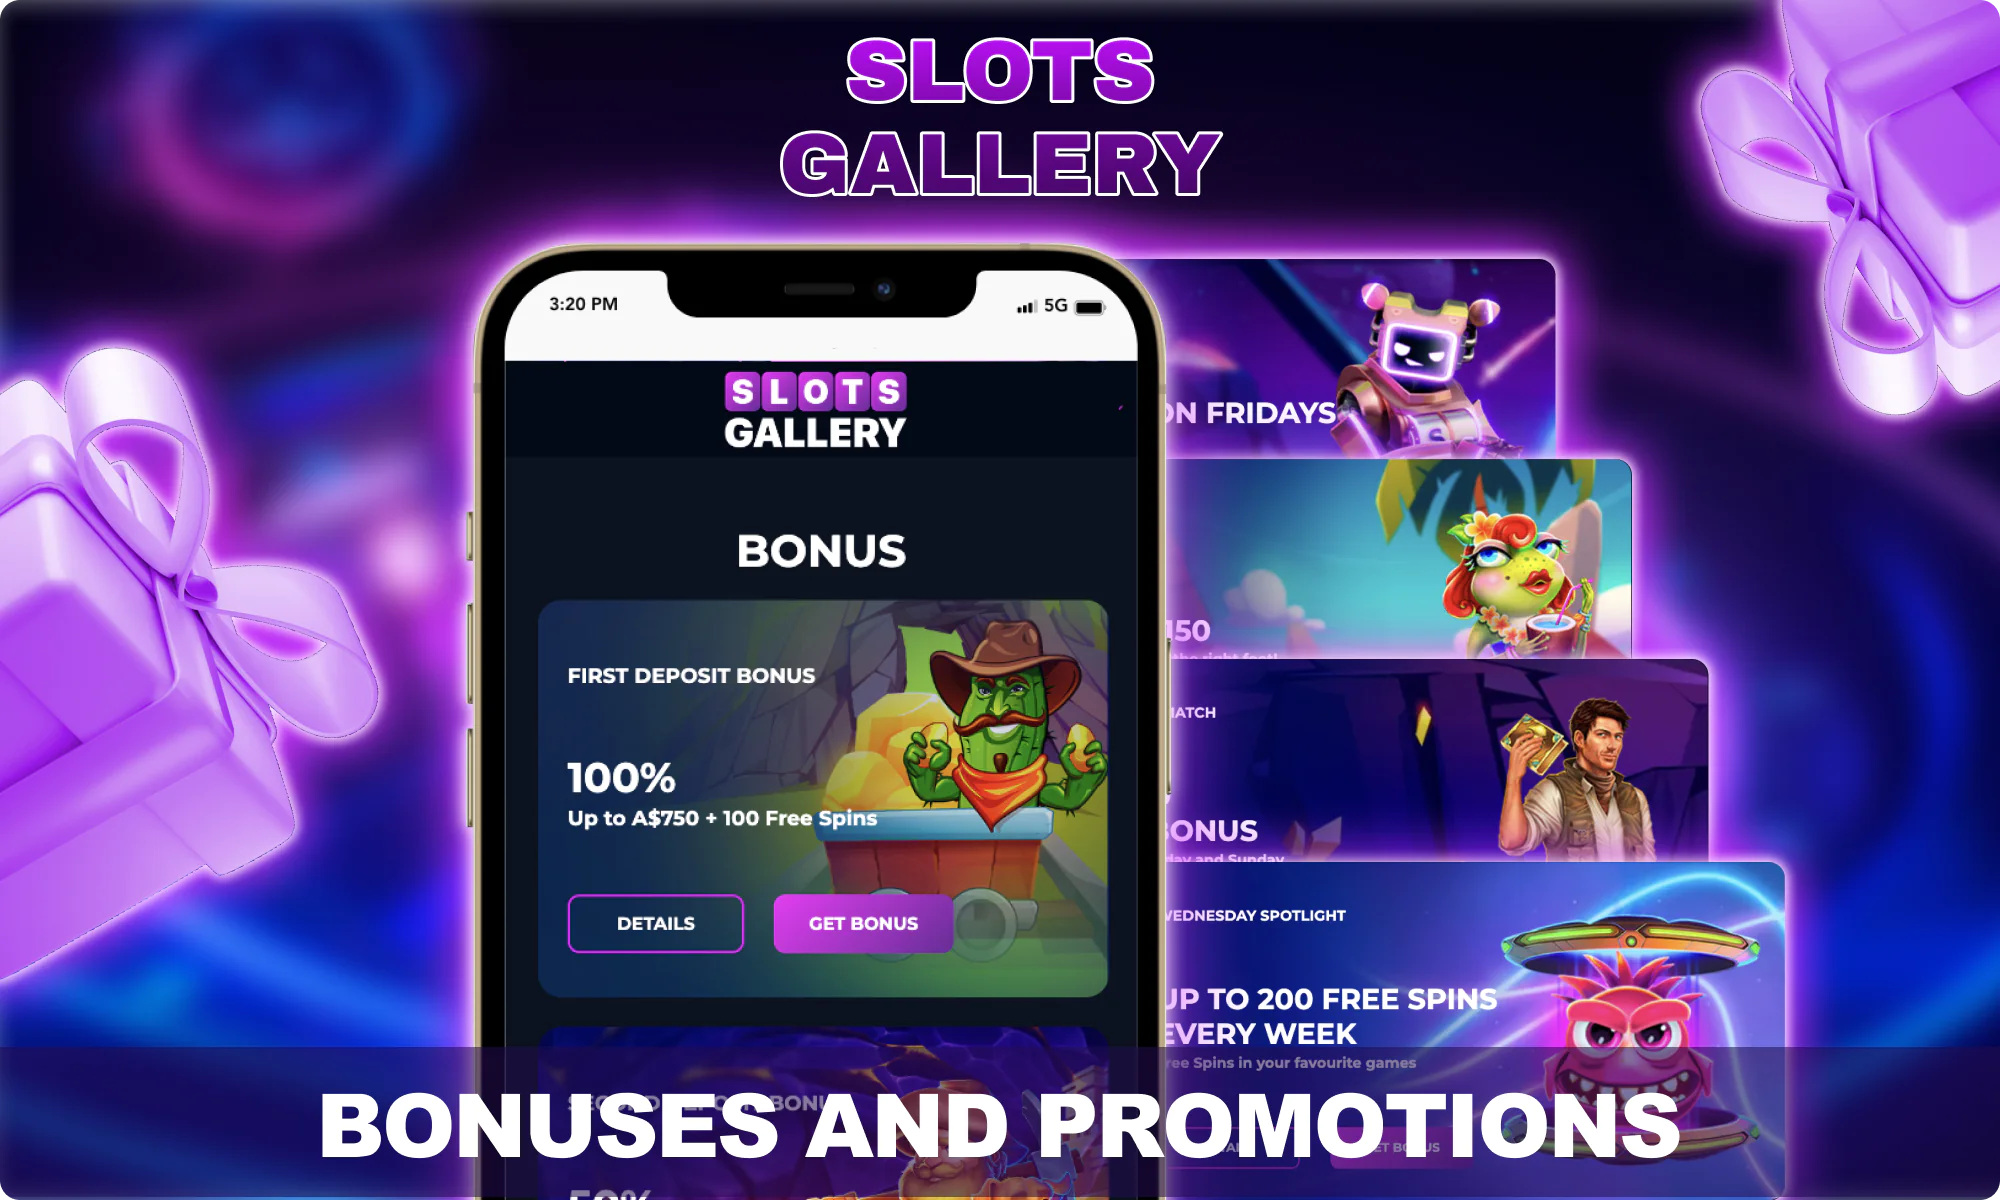 Bonuses and promotions for Australian players in the App - Slots Gallery